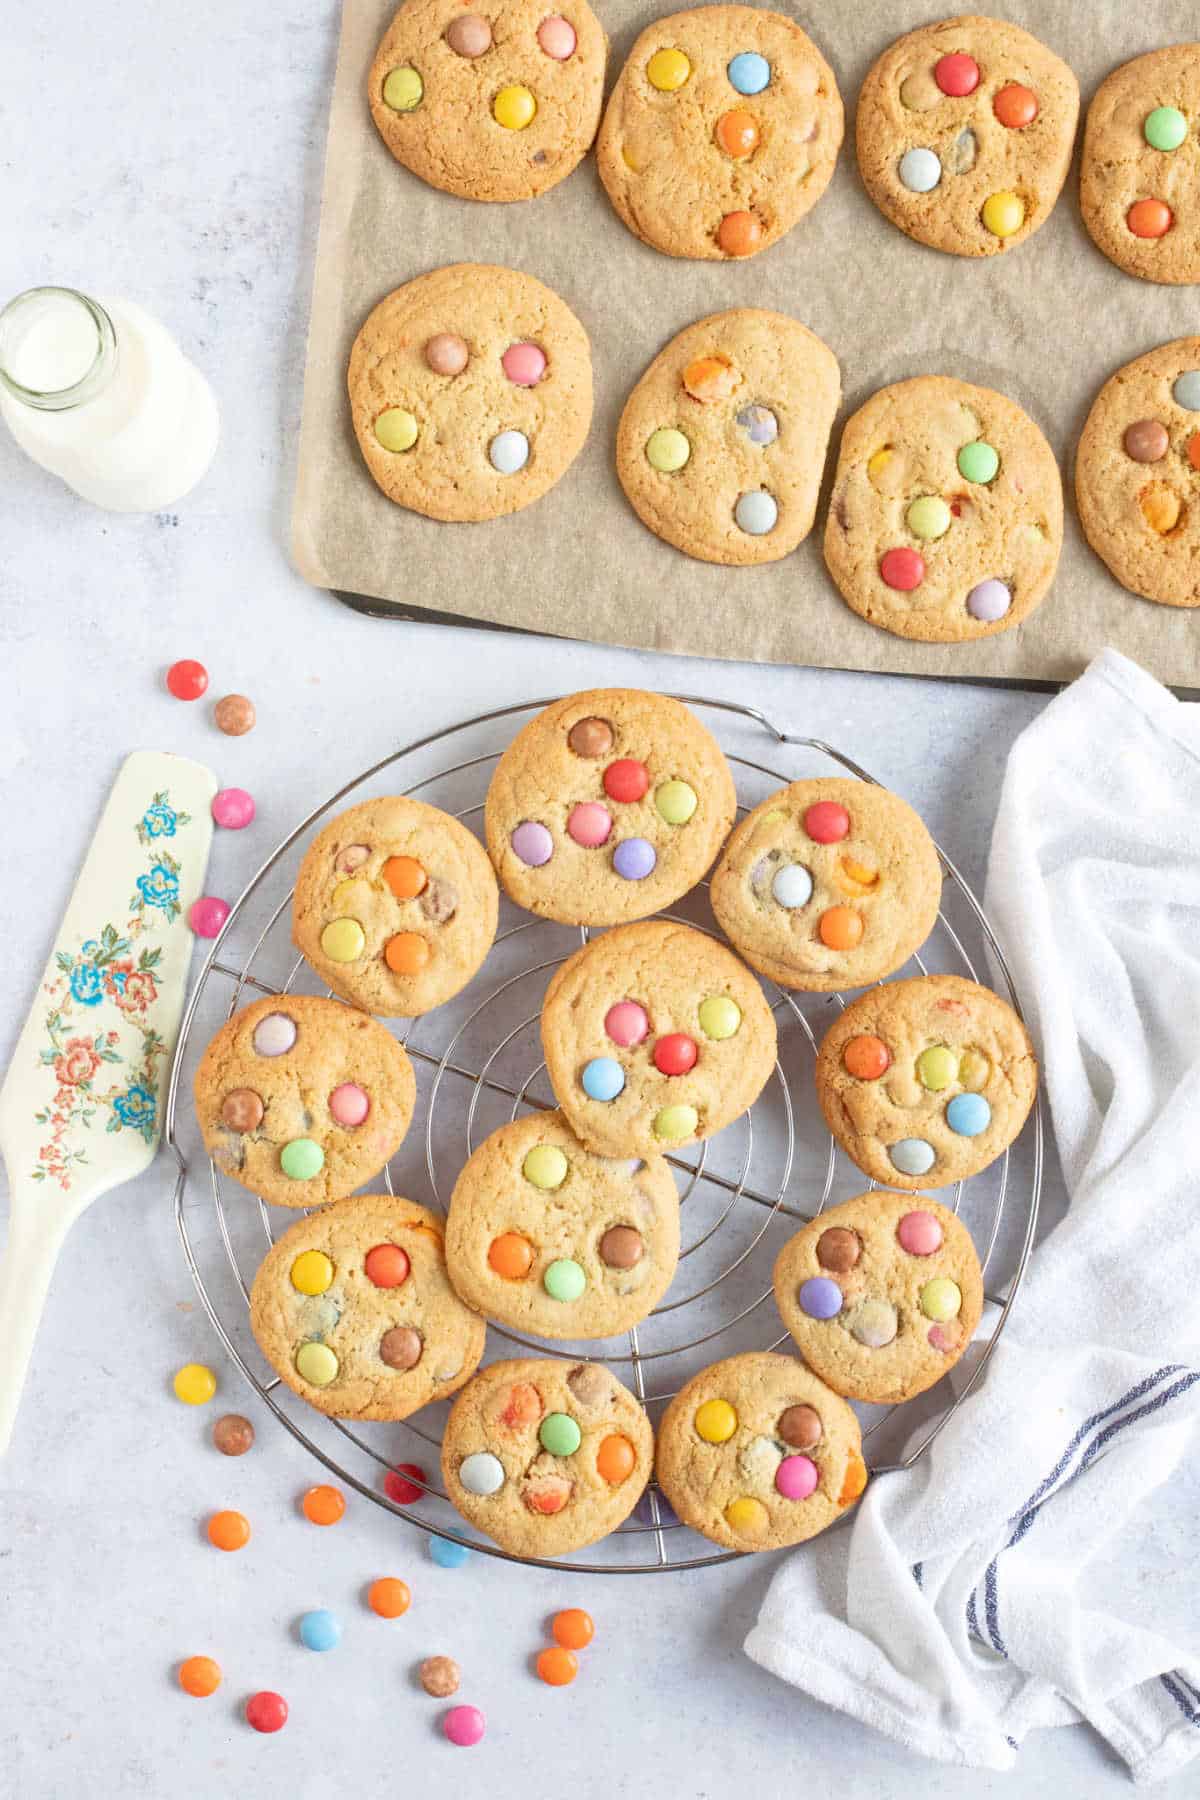 Smarties cookies on a wire cooling rack.